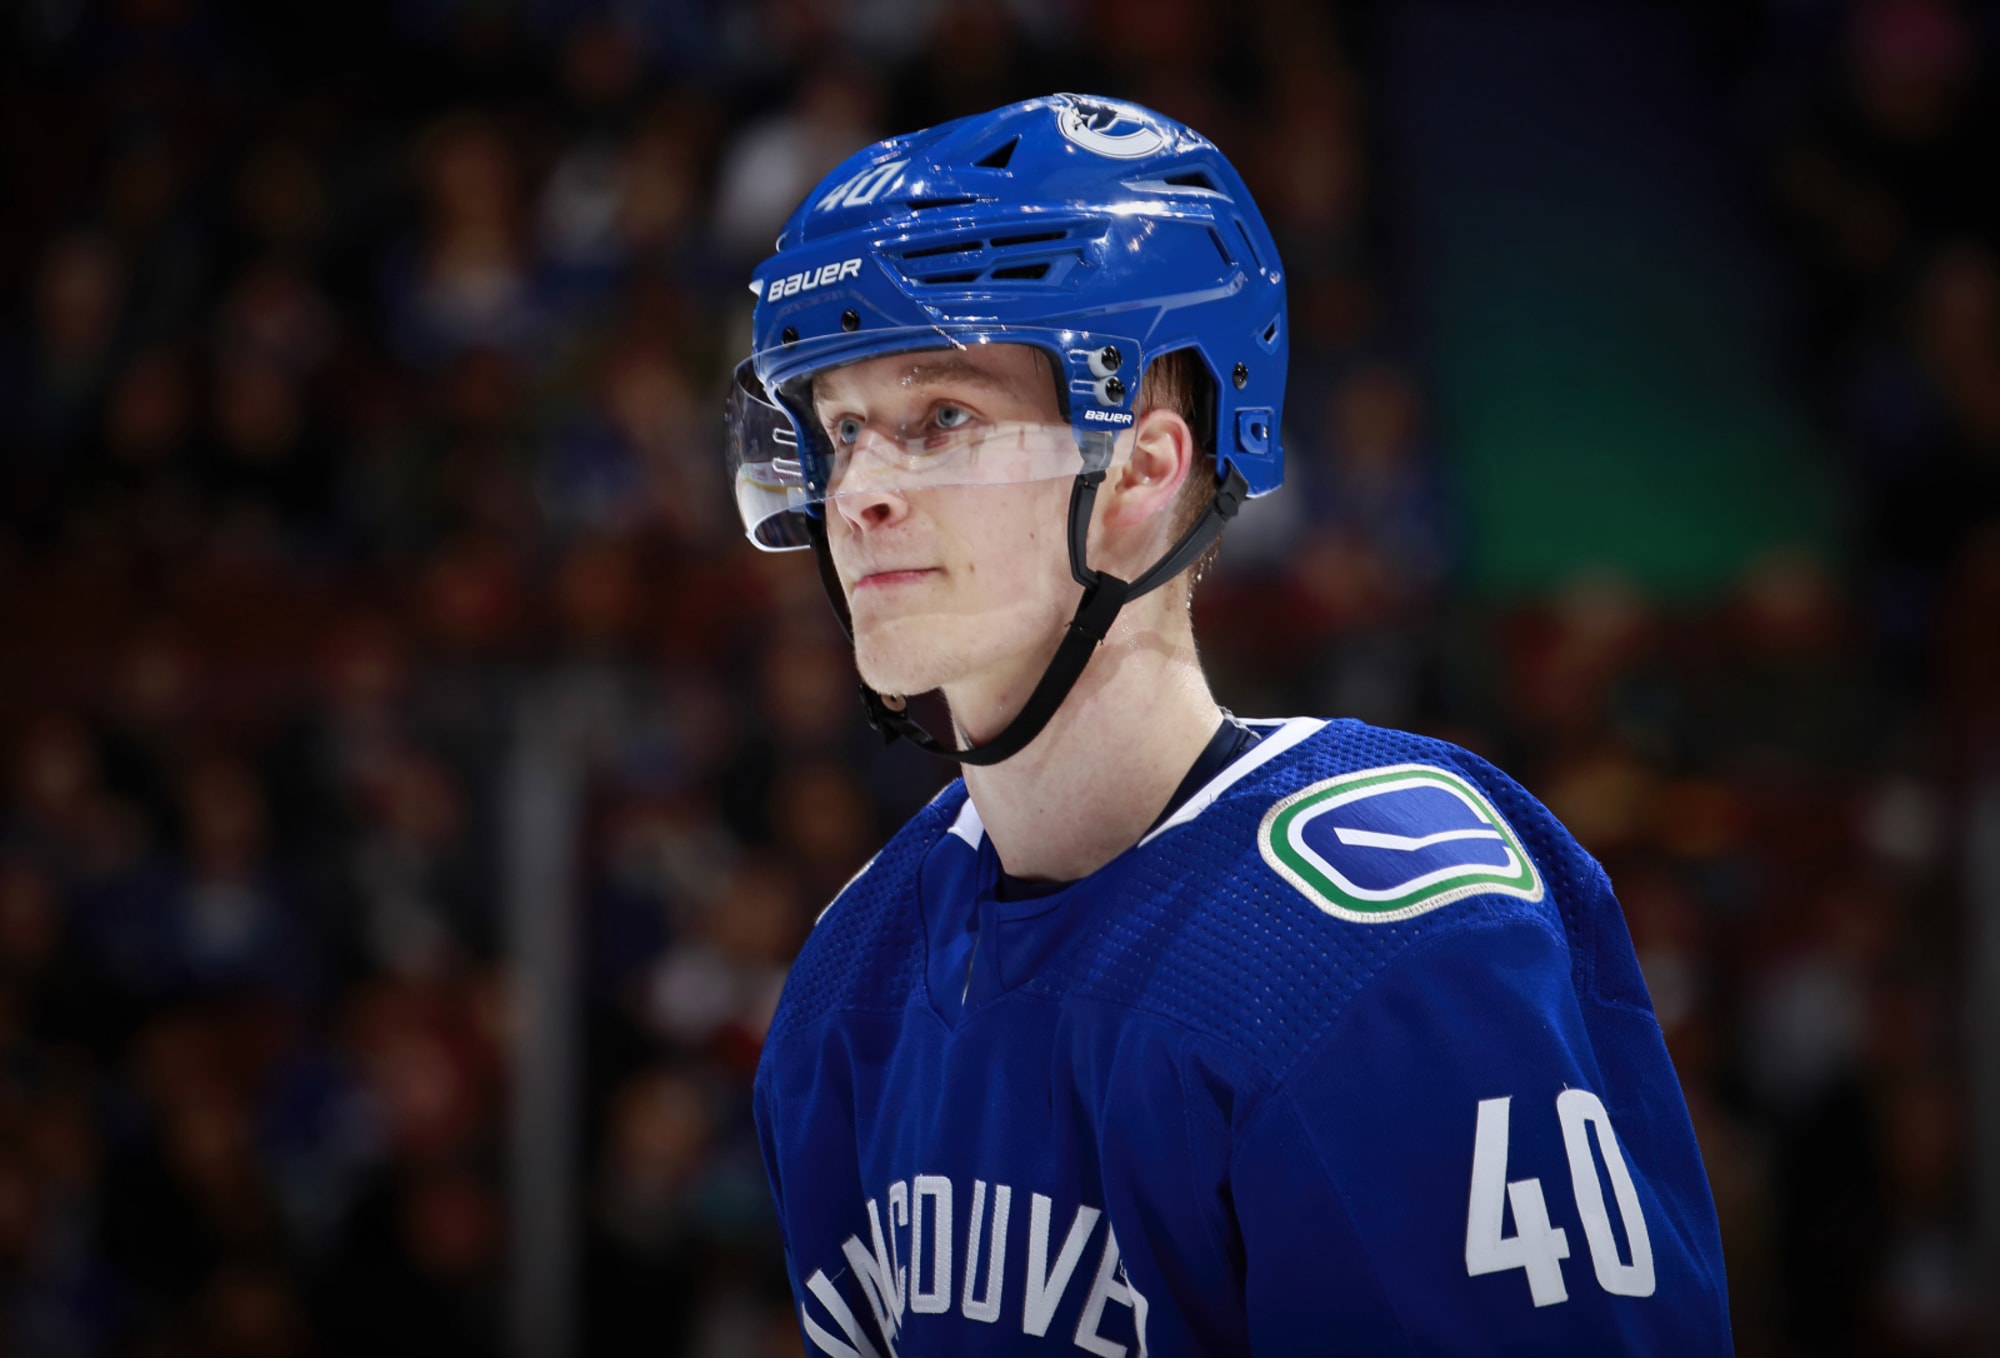 Vancouver Canucks: Elias Pettersson close to breaking multiple records